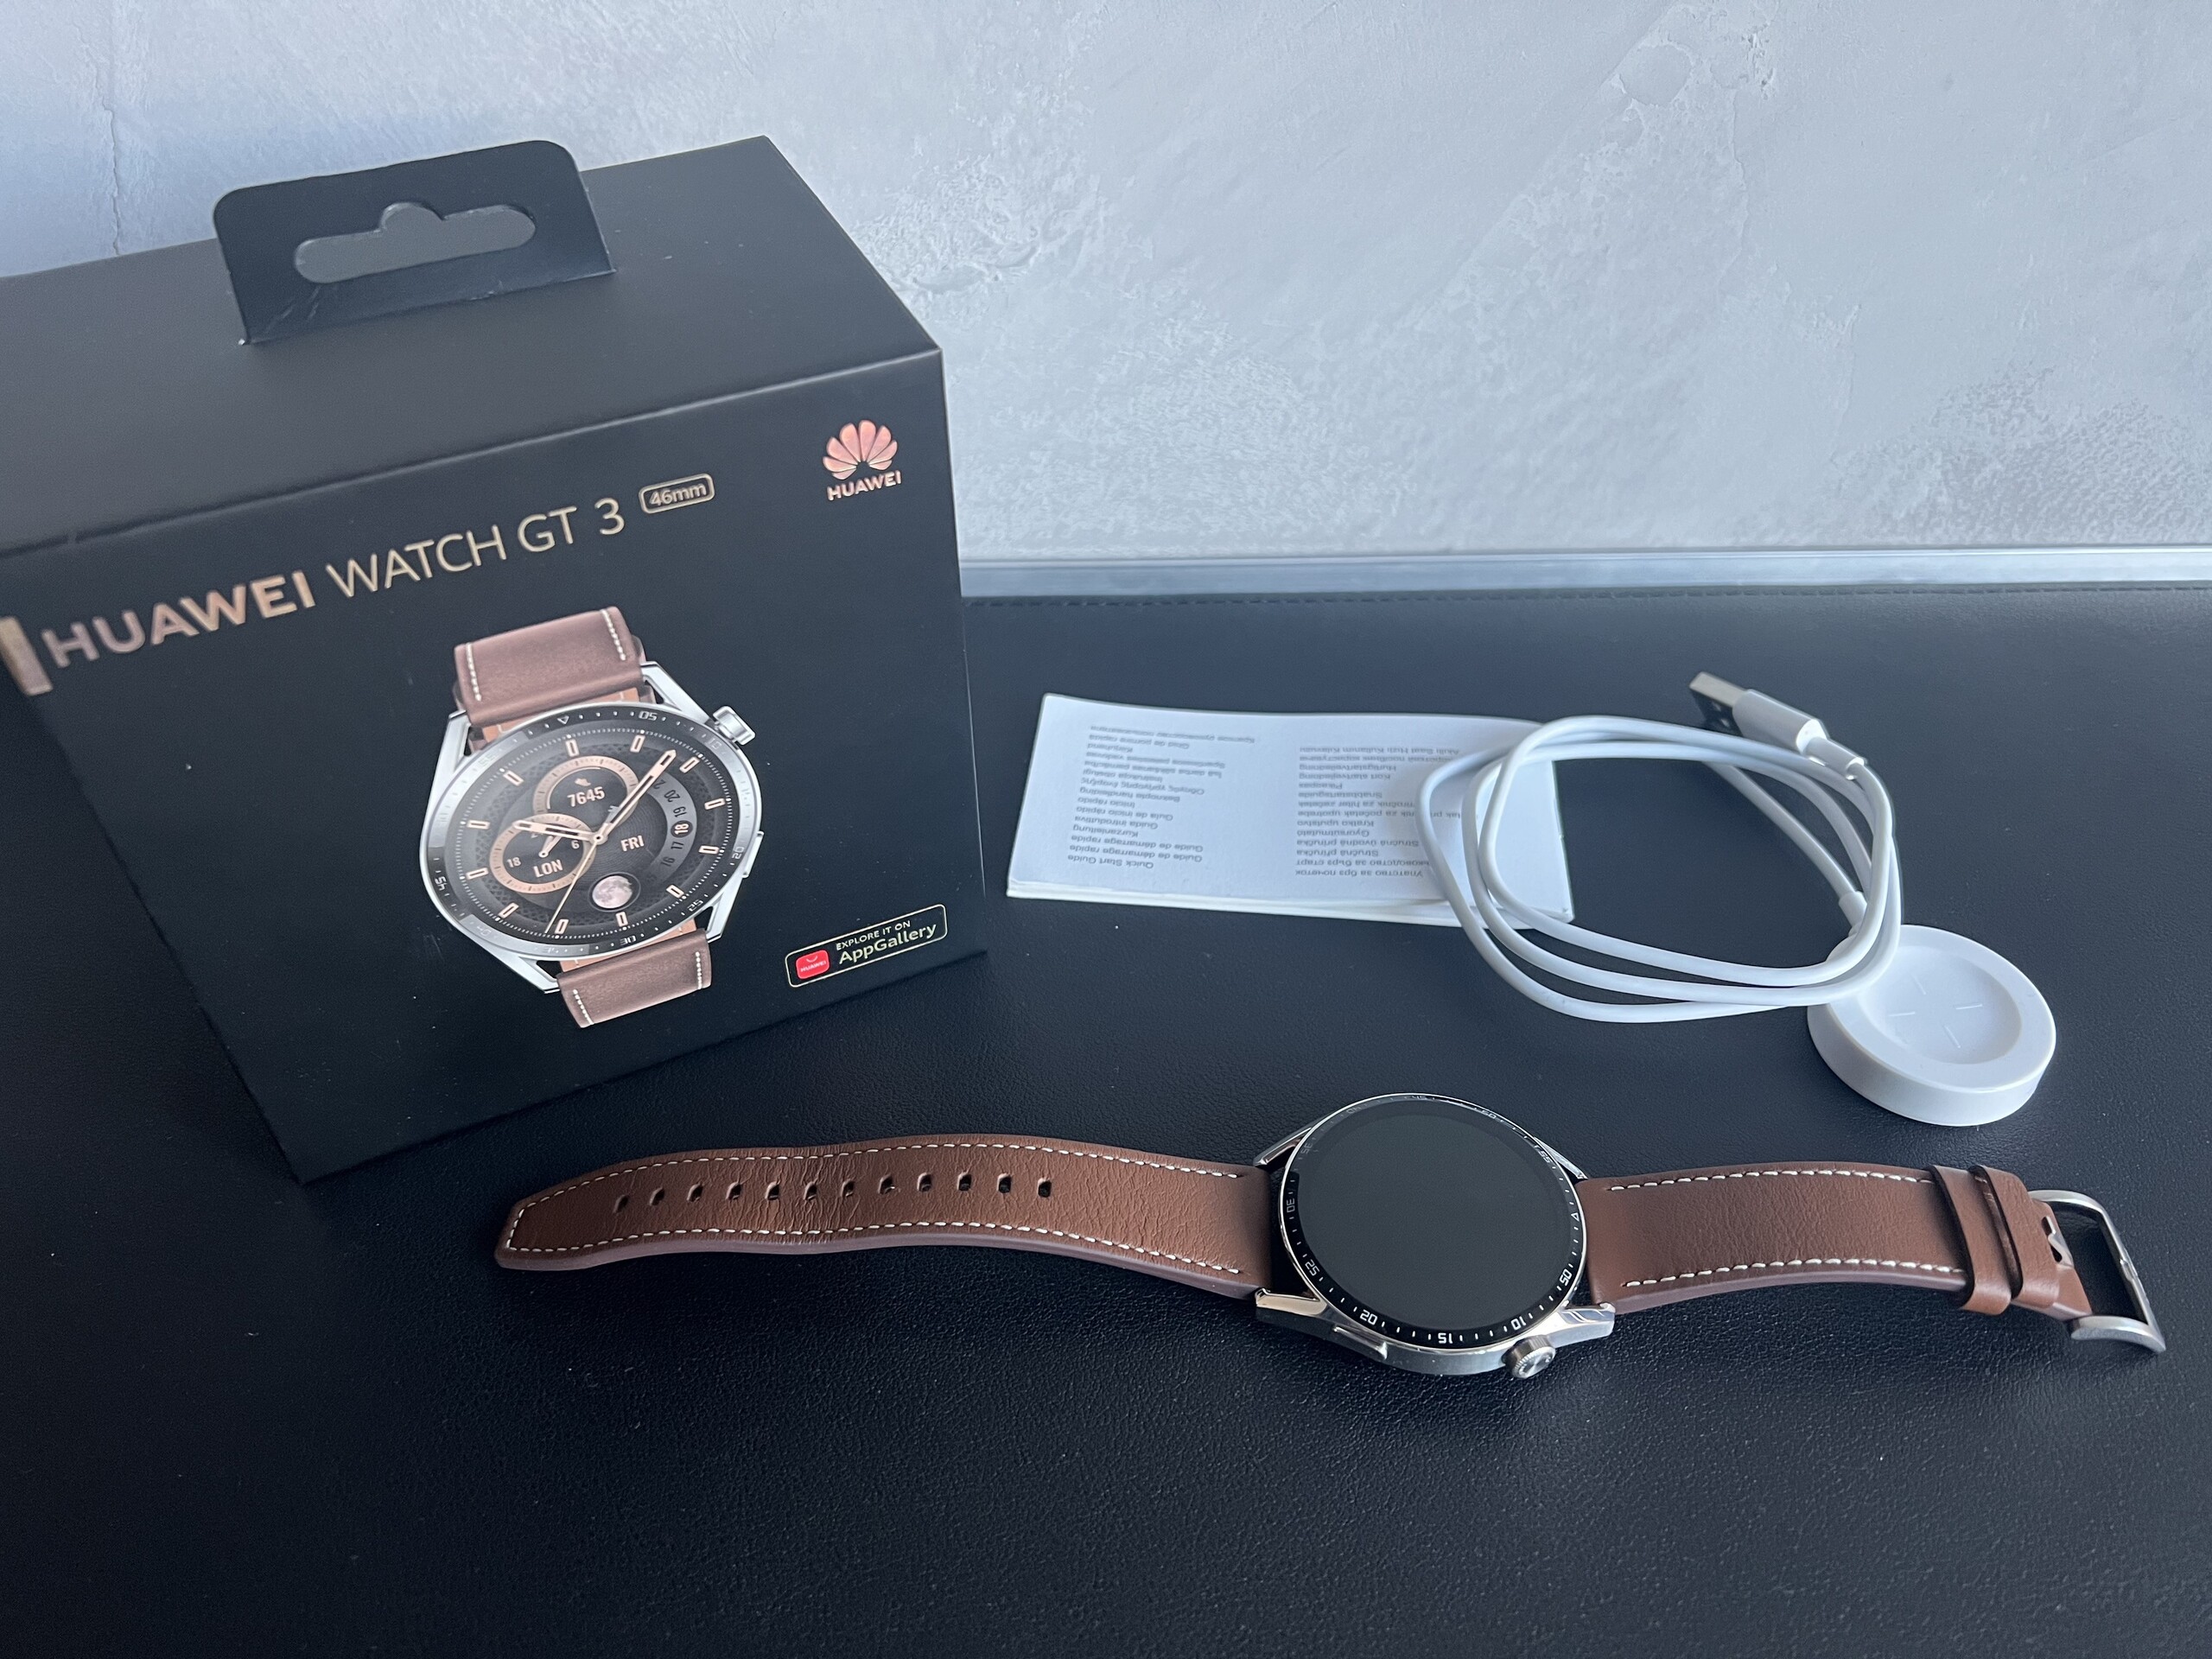 Huawei Watch 3 hands-on: A solid smartwatch with far-reaching implications  - CNET